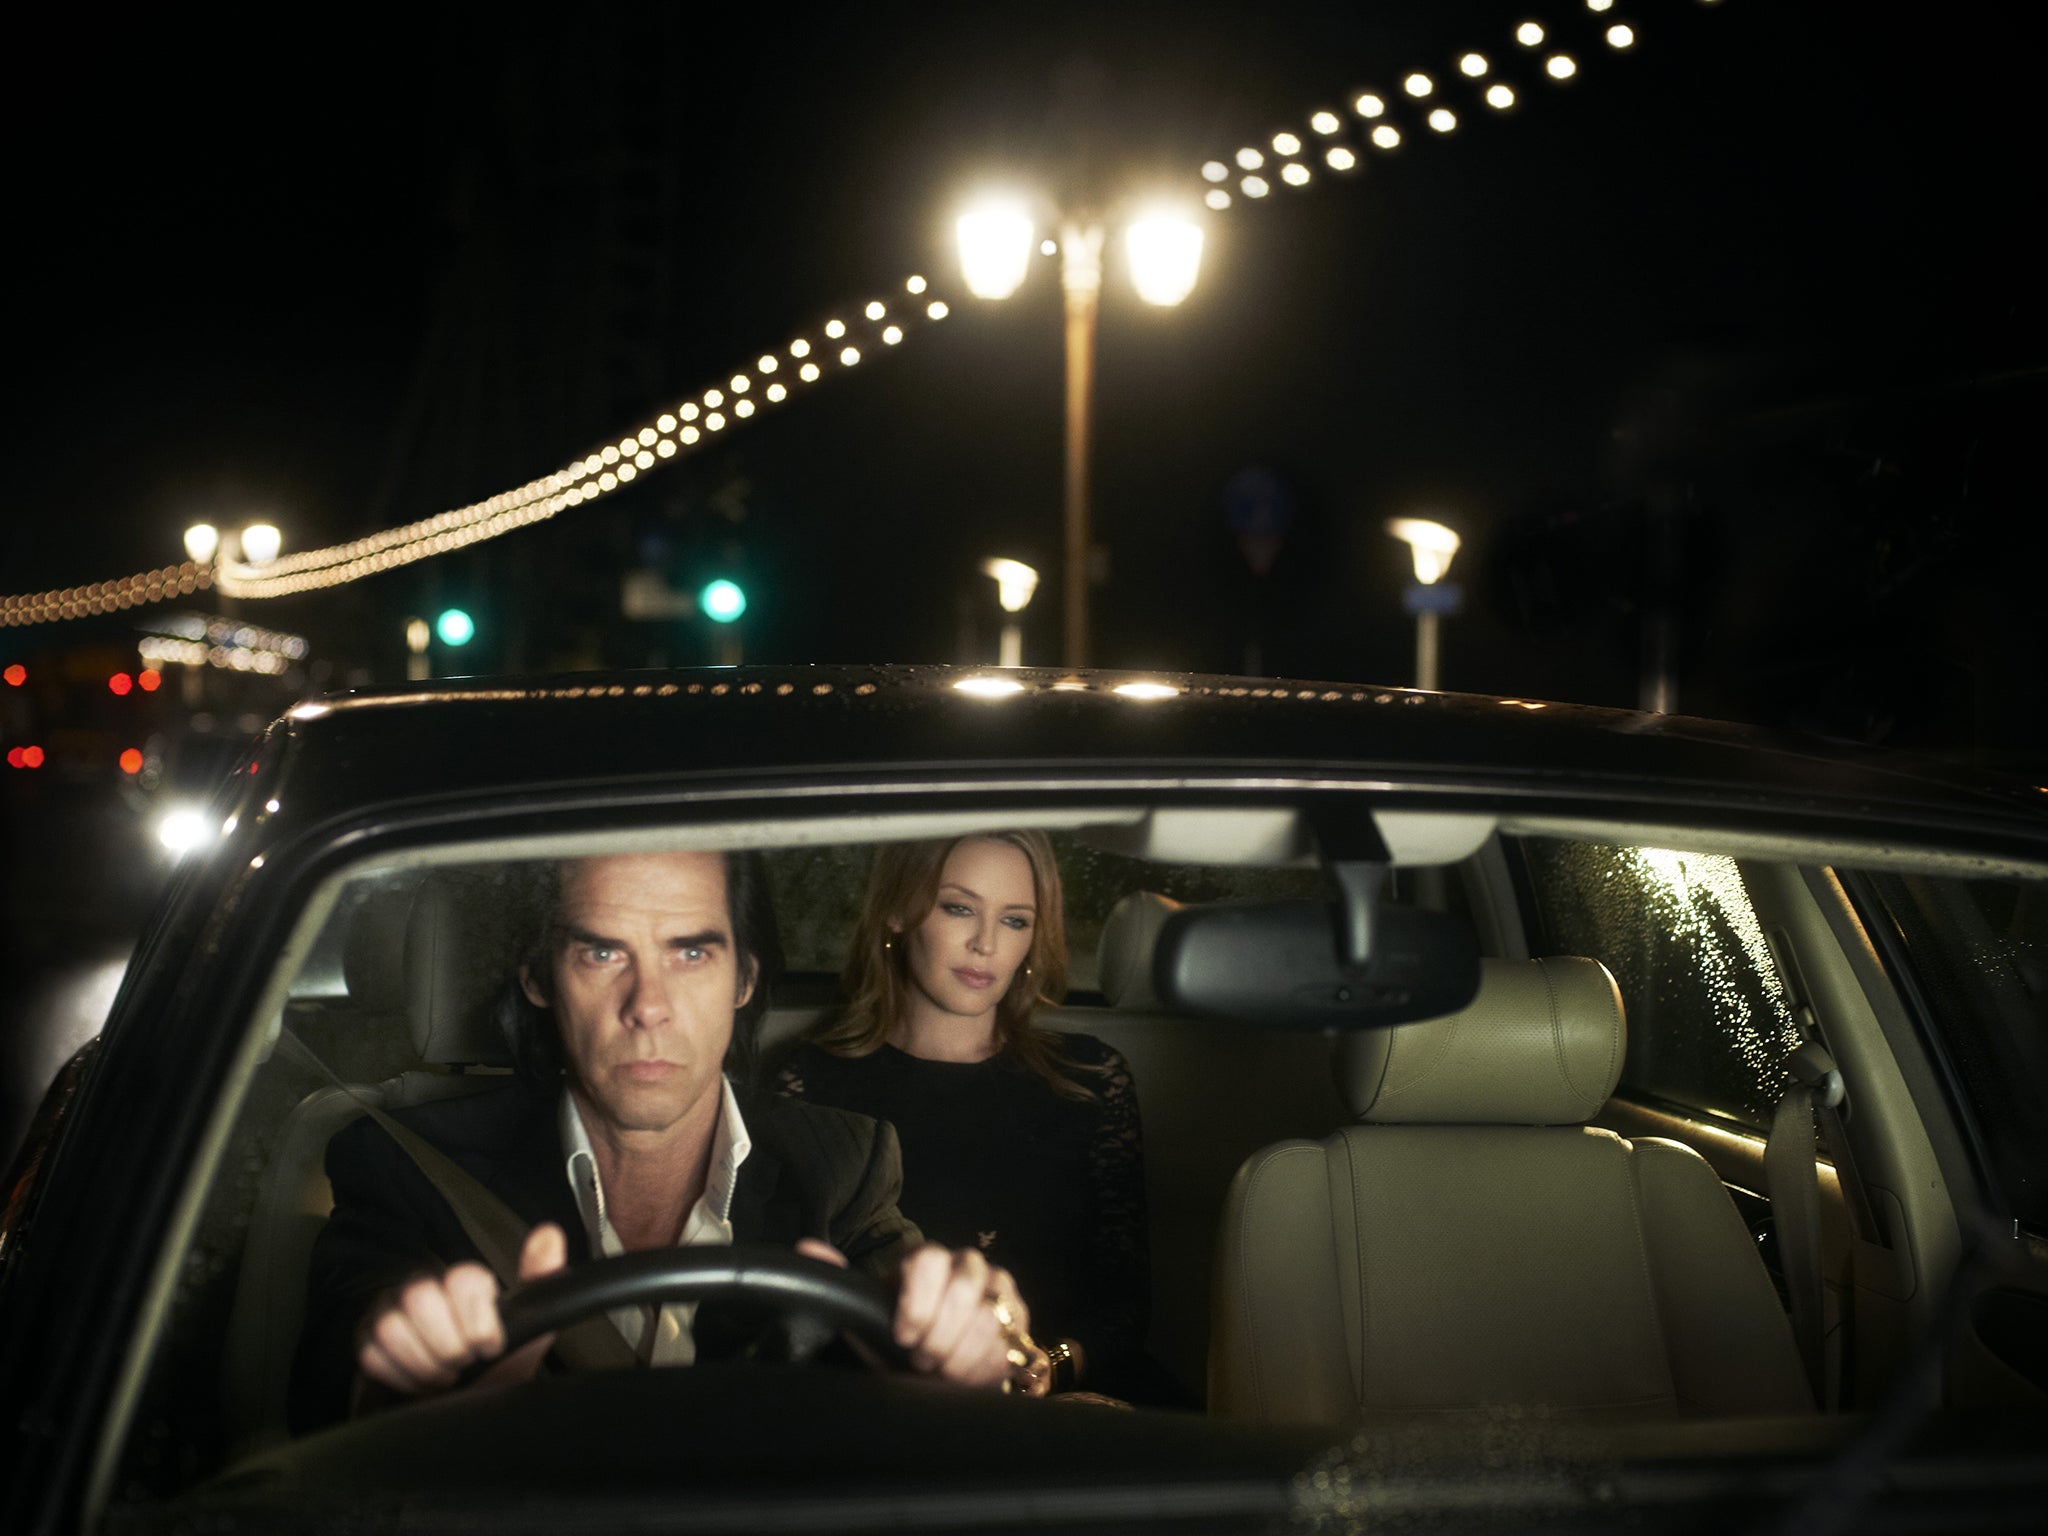 Can’t get you out of my car: Nick Cave drives Kylie Minogue in Iain Forsyth and Jane Pollard’s ‘20,000 Days on Earth’